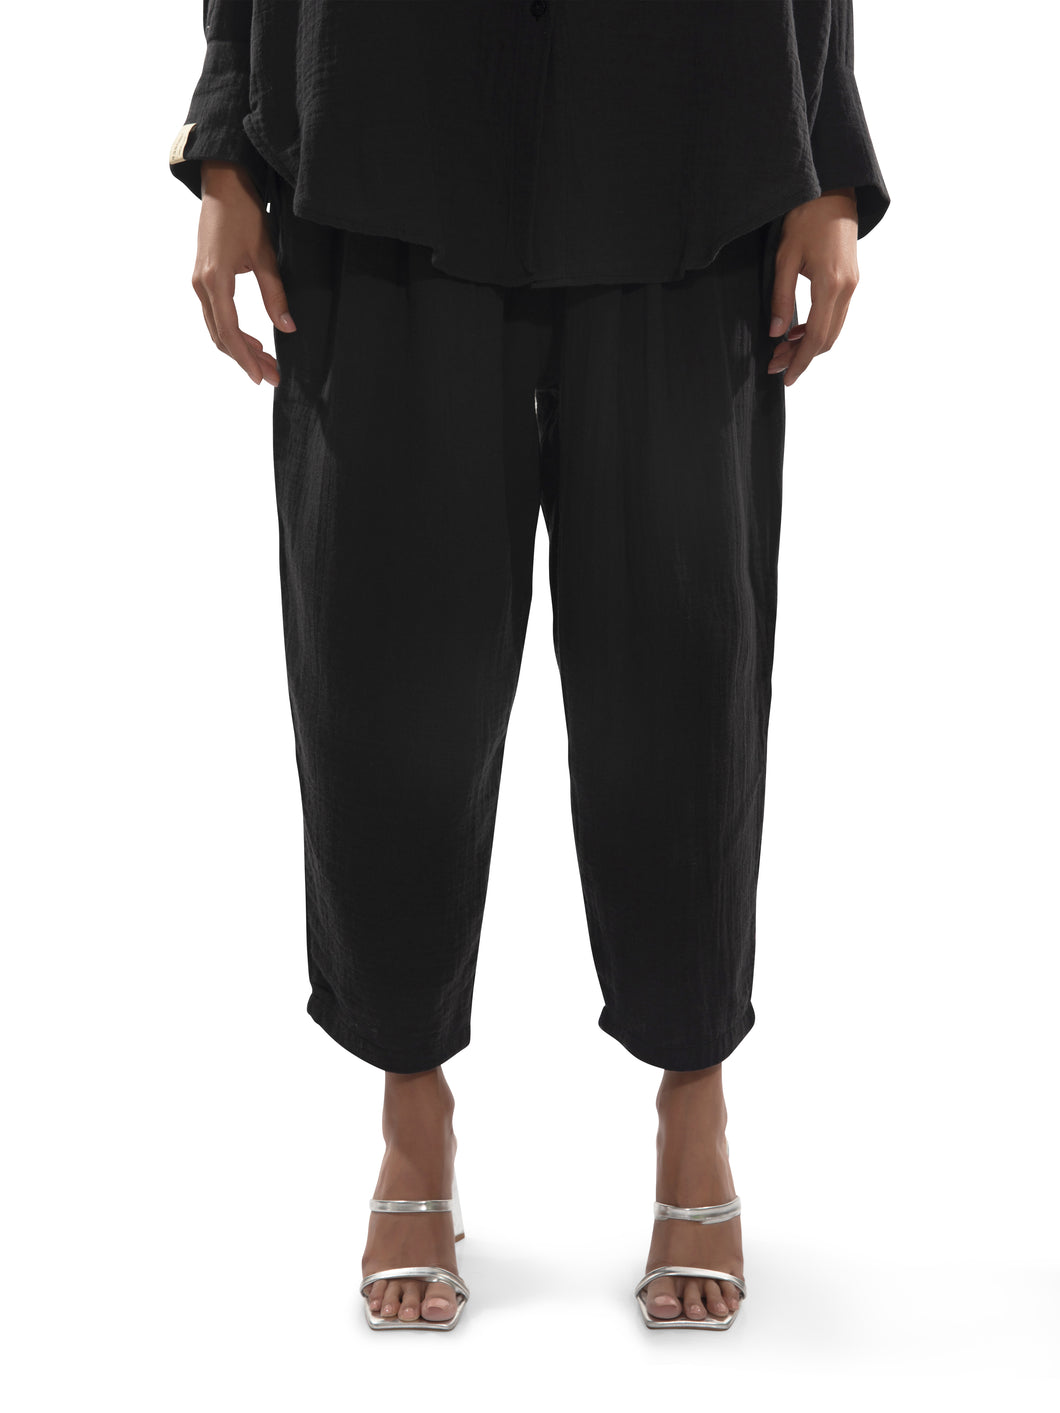 Eco Vibe Black Ankle Trousers